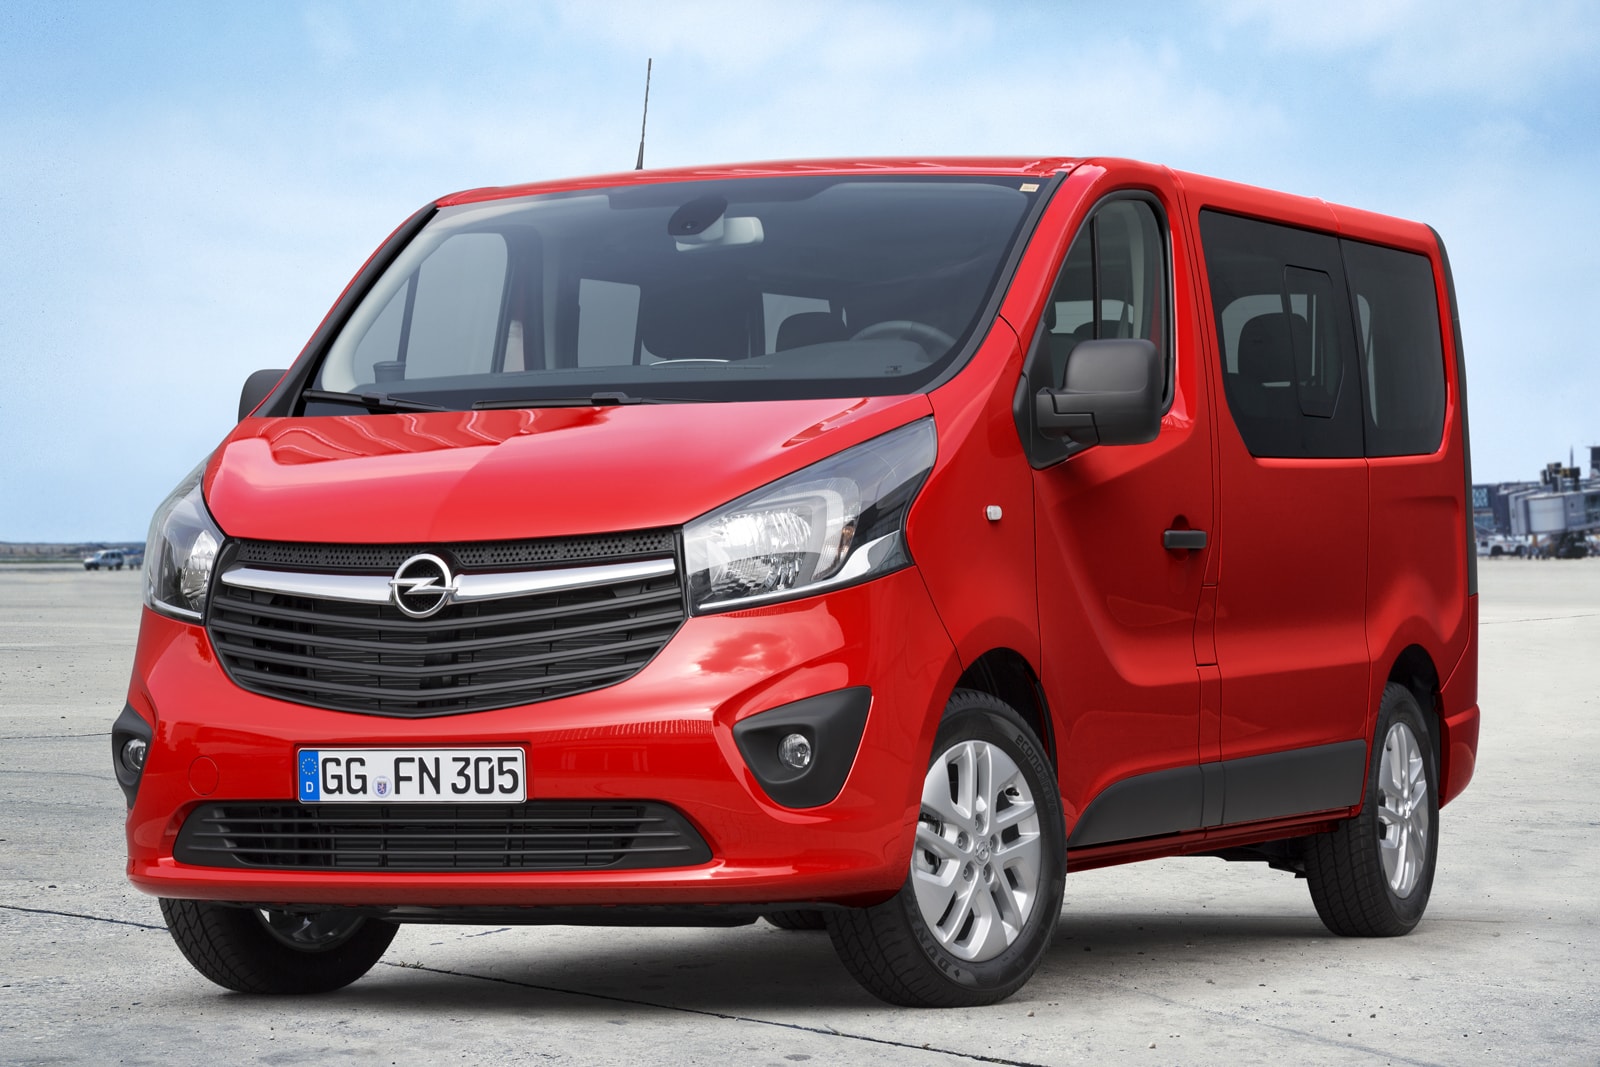 Opel Vivaro B Combi Variant Detailed, Priced From €30,327 in Germany -  autoevolution